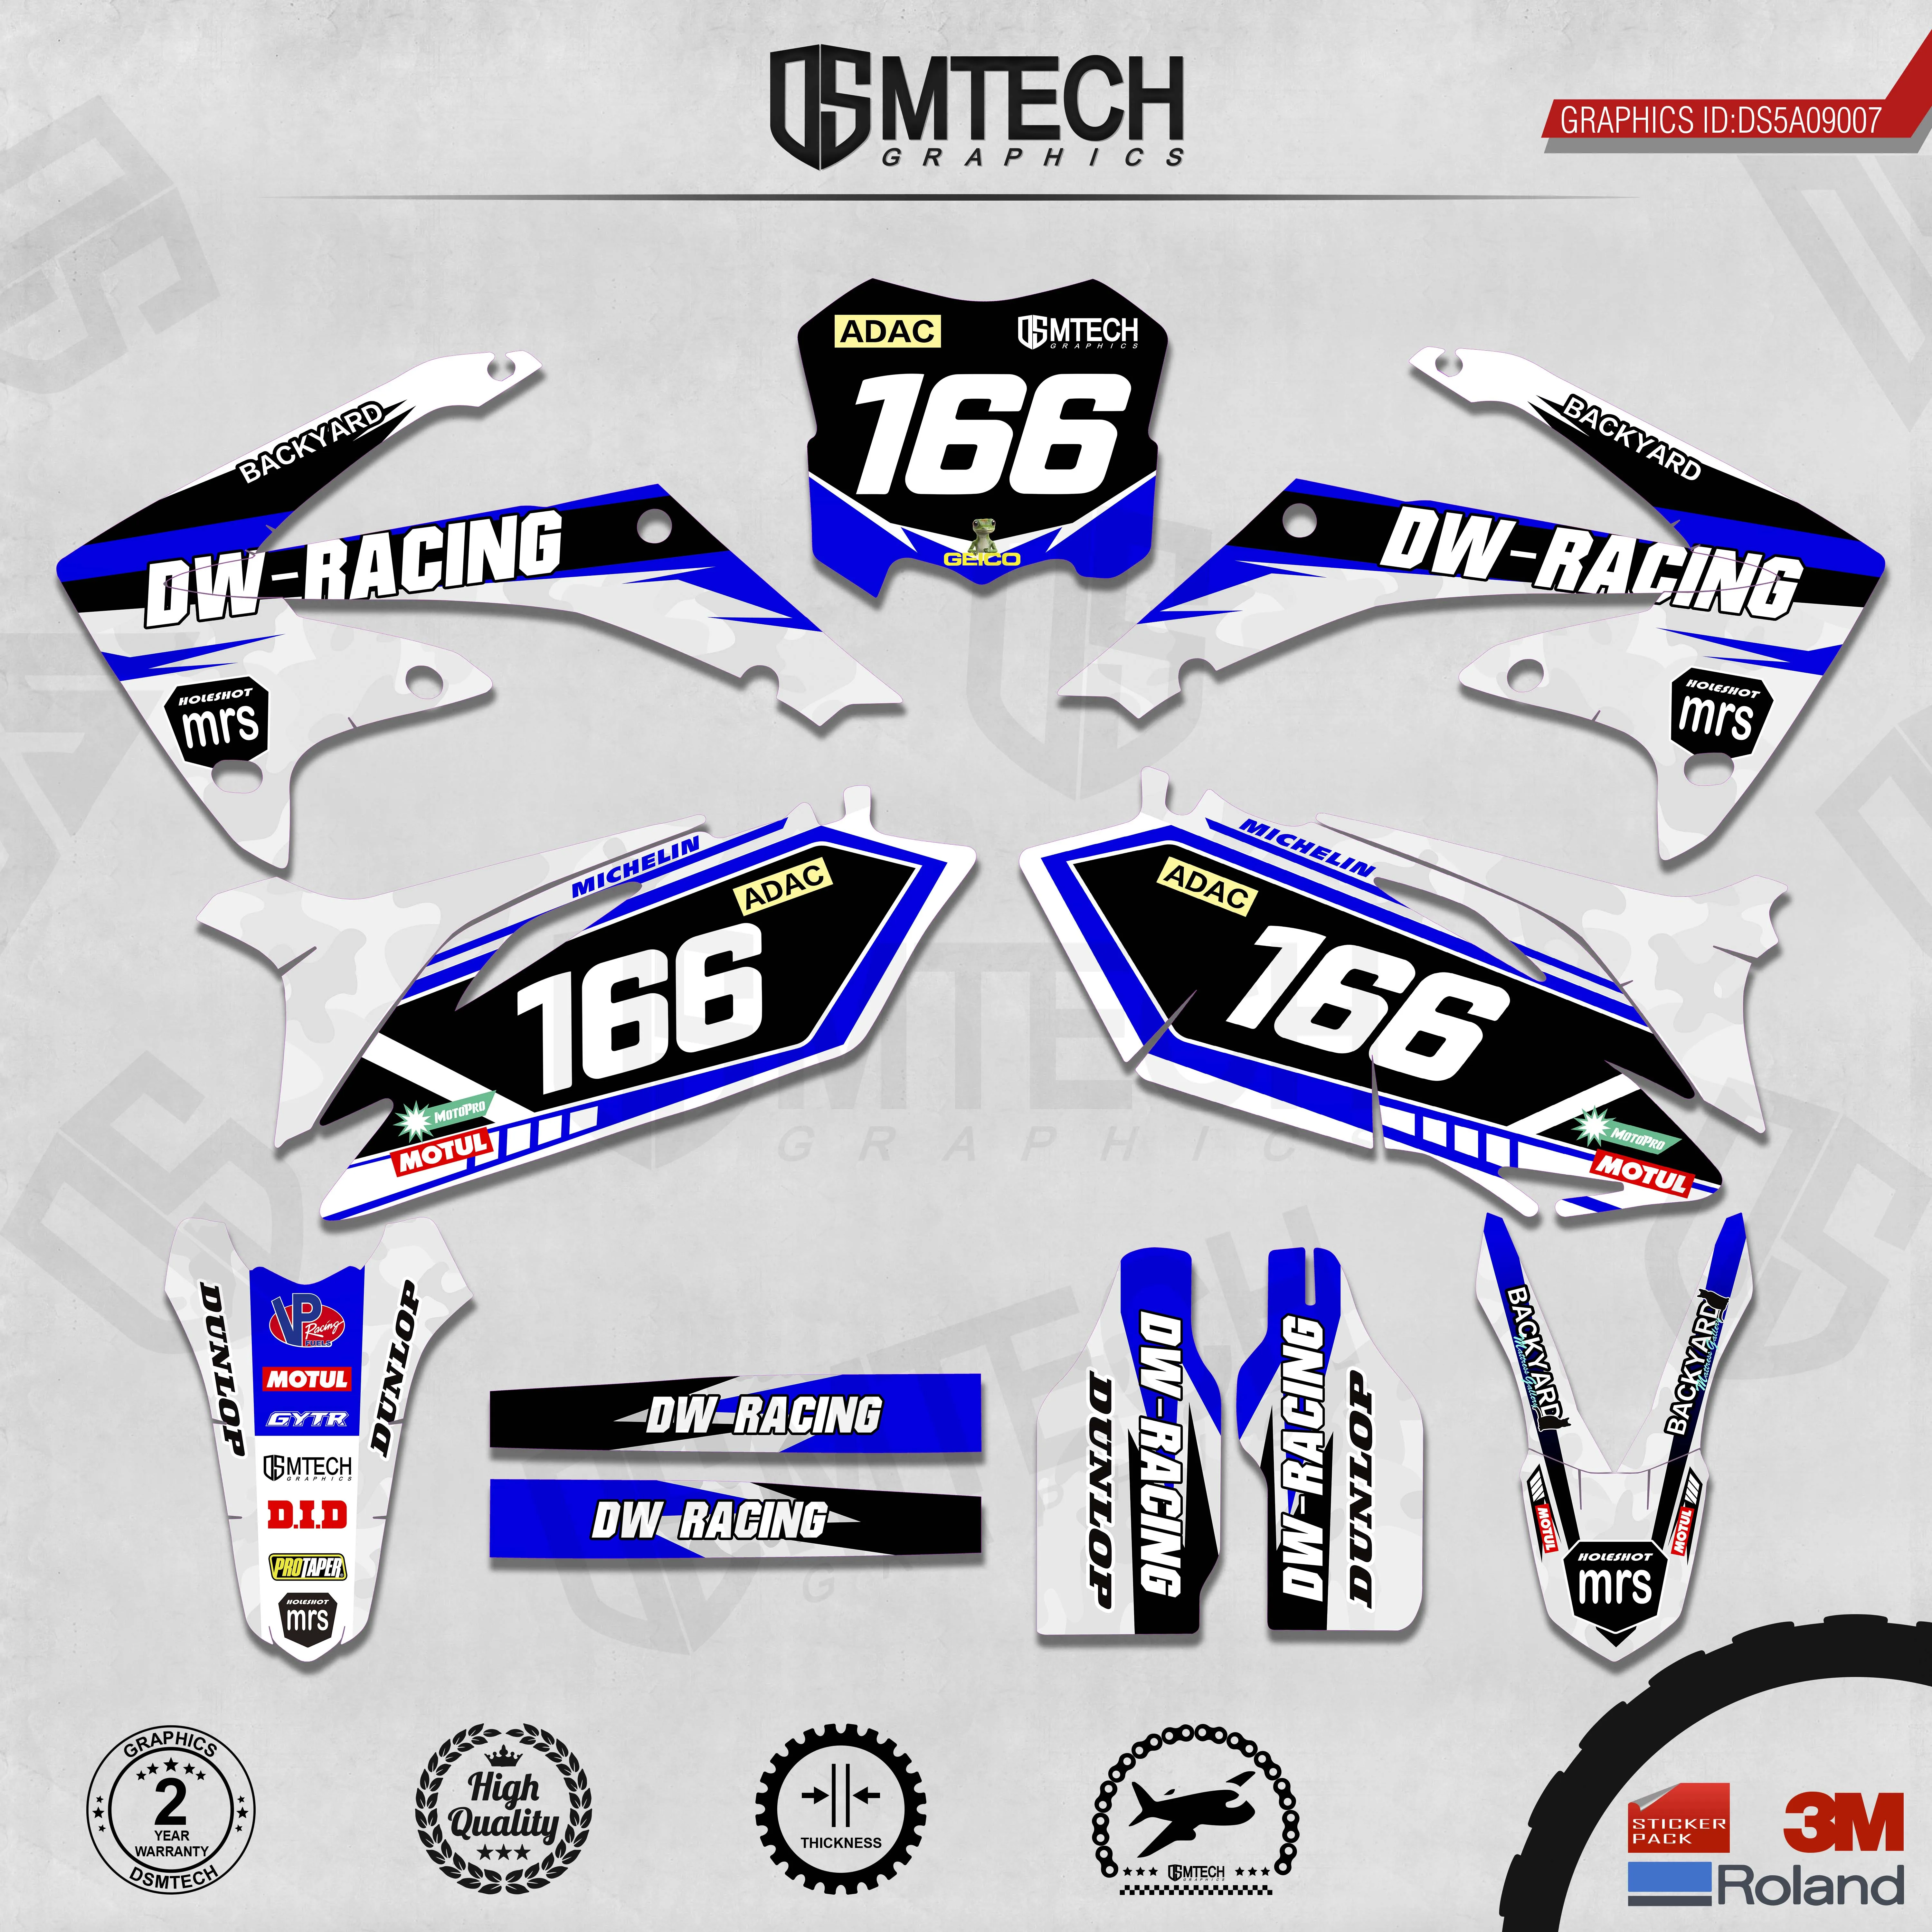 dsmtech-customized-team-graphics-backgrounds-decals-3m-custom-stickers-for-2010-2013-crf250r-2009-2012-crf450r-007